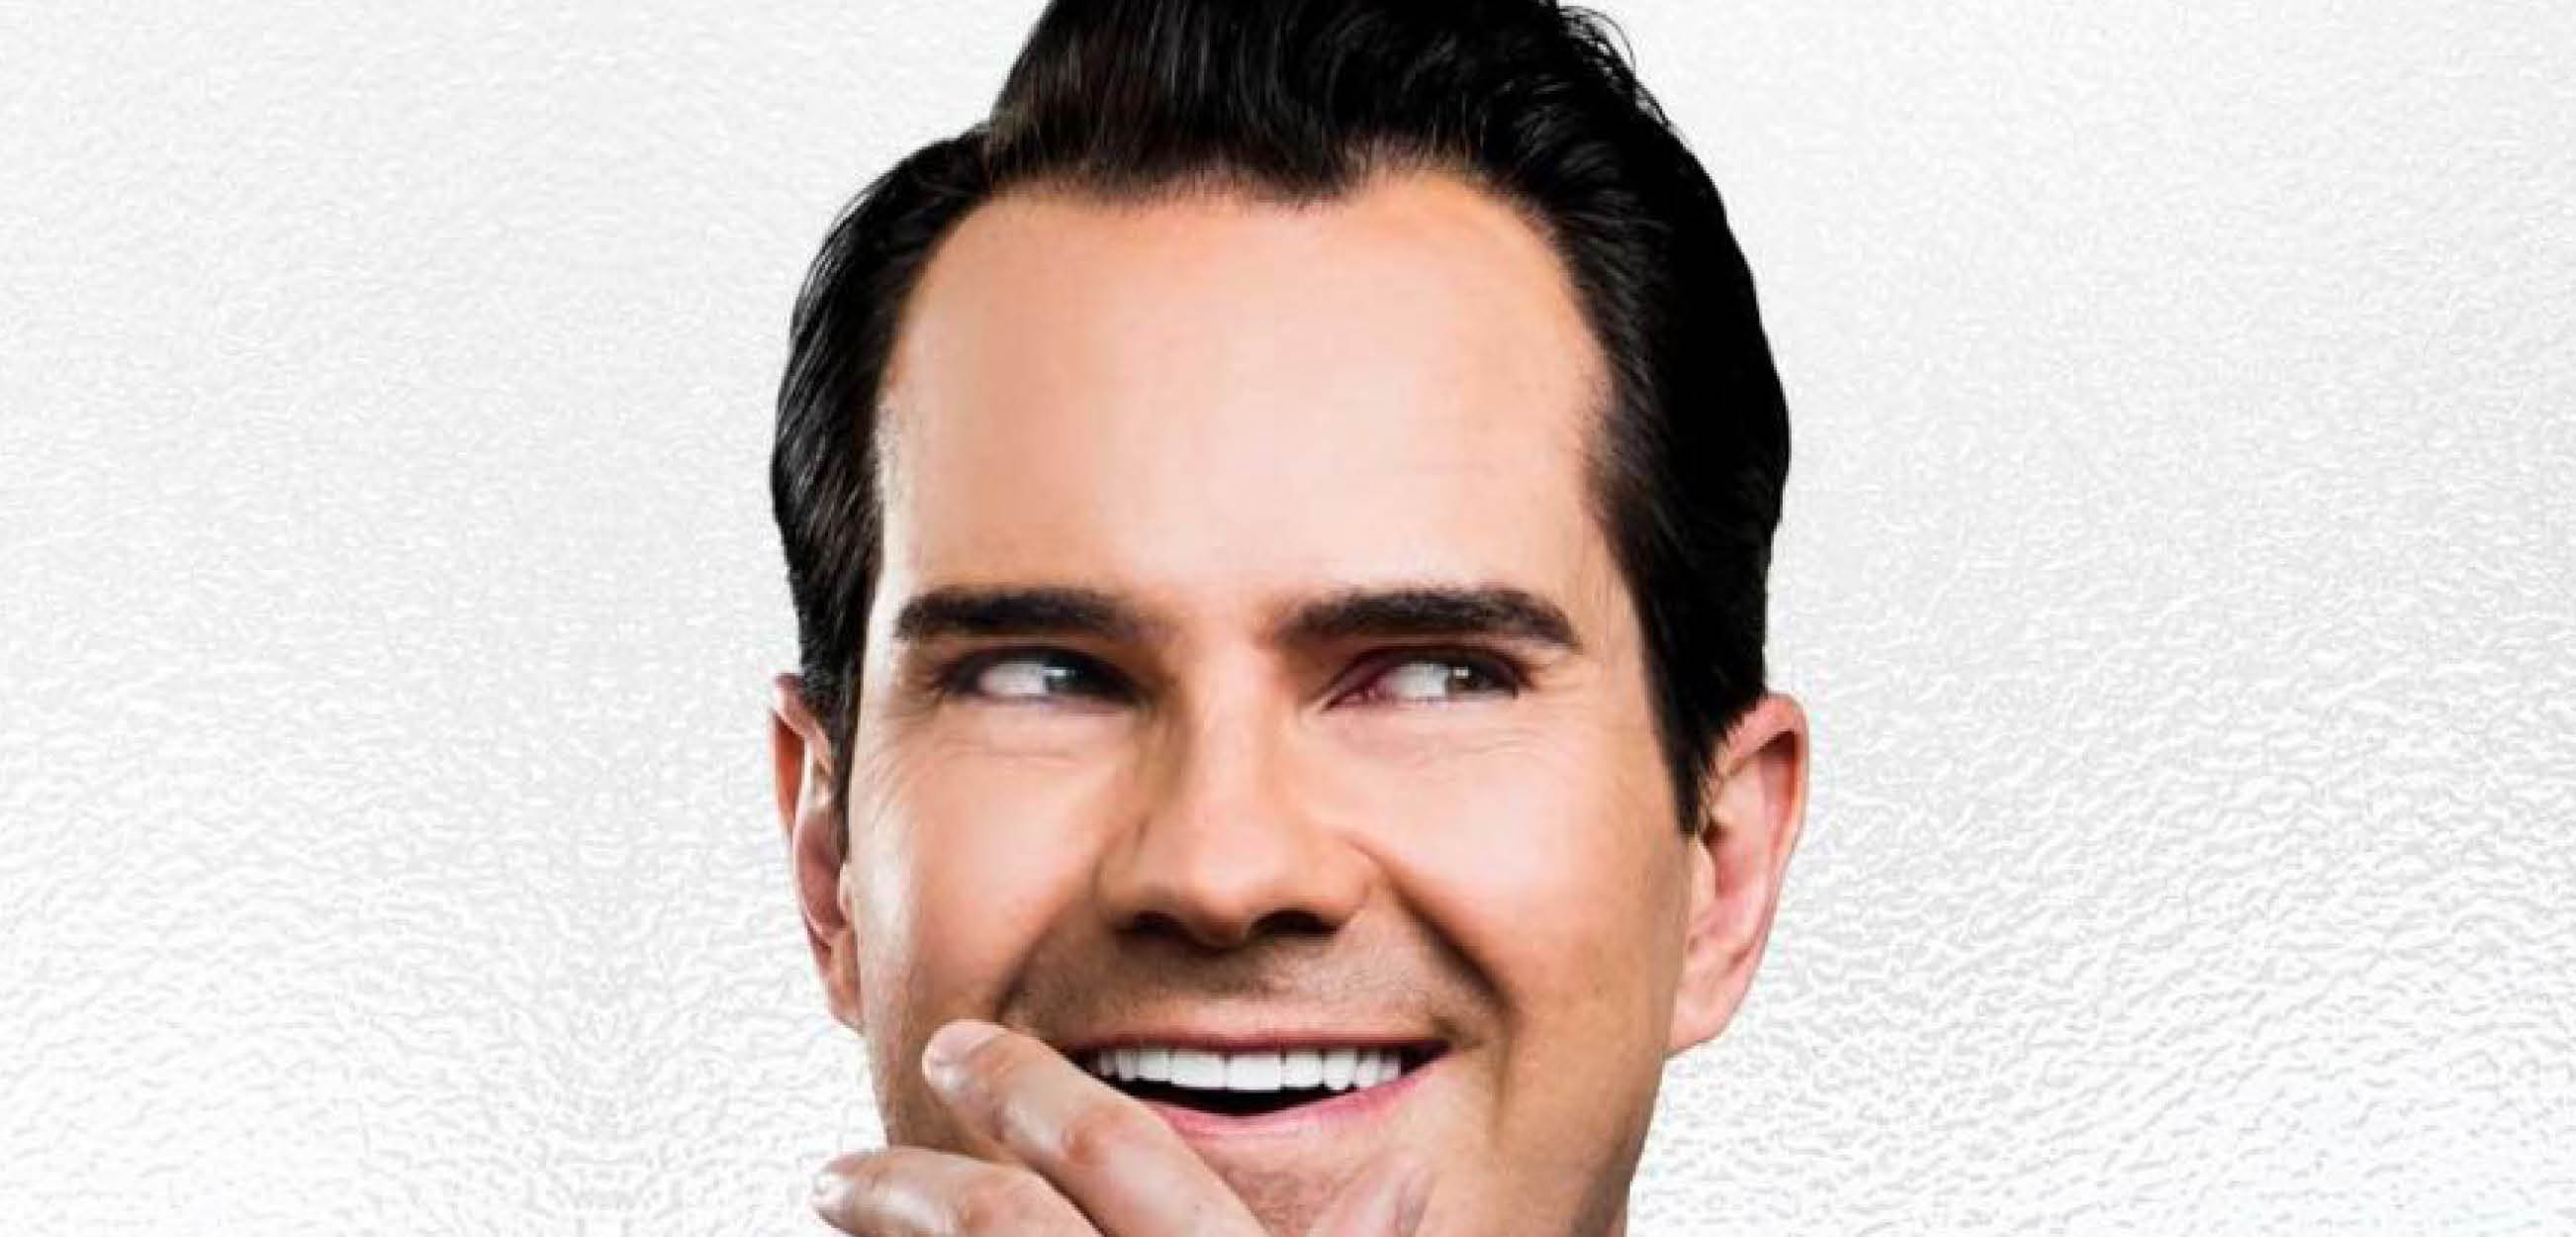 jimmy carr, comedy, stand-up comedy, guide to, kingston, richmond, rose theatre, guide to, whats on, june 2019, guide to, entertainment, newspaper